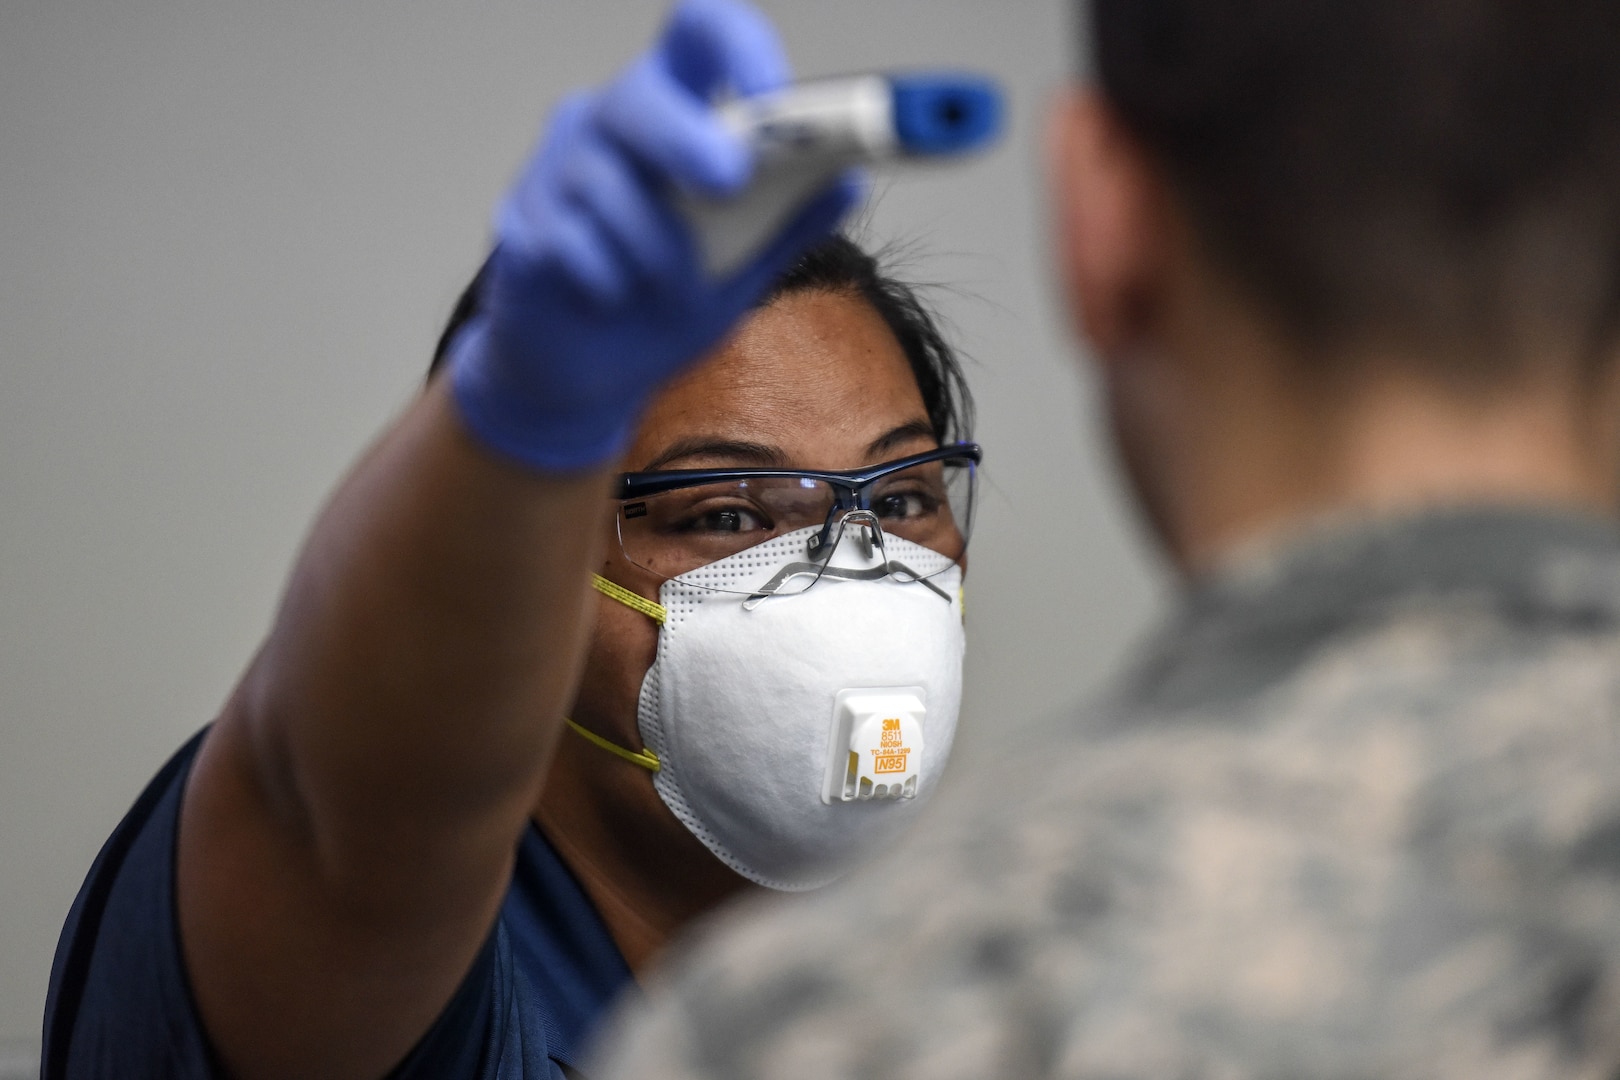 Kuhina Talimalie, 735th Air Mobility Squadron passenger service and baggage agent, uses a no-touch thermometer to check a service member's temperature at Joint Base Pearl Harbor-Hickam, Hawaii, March 25, 2020. Passenger terminal airmen are screening passengers for fever to help mitigate the spread of COVID-19.